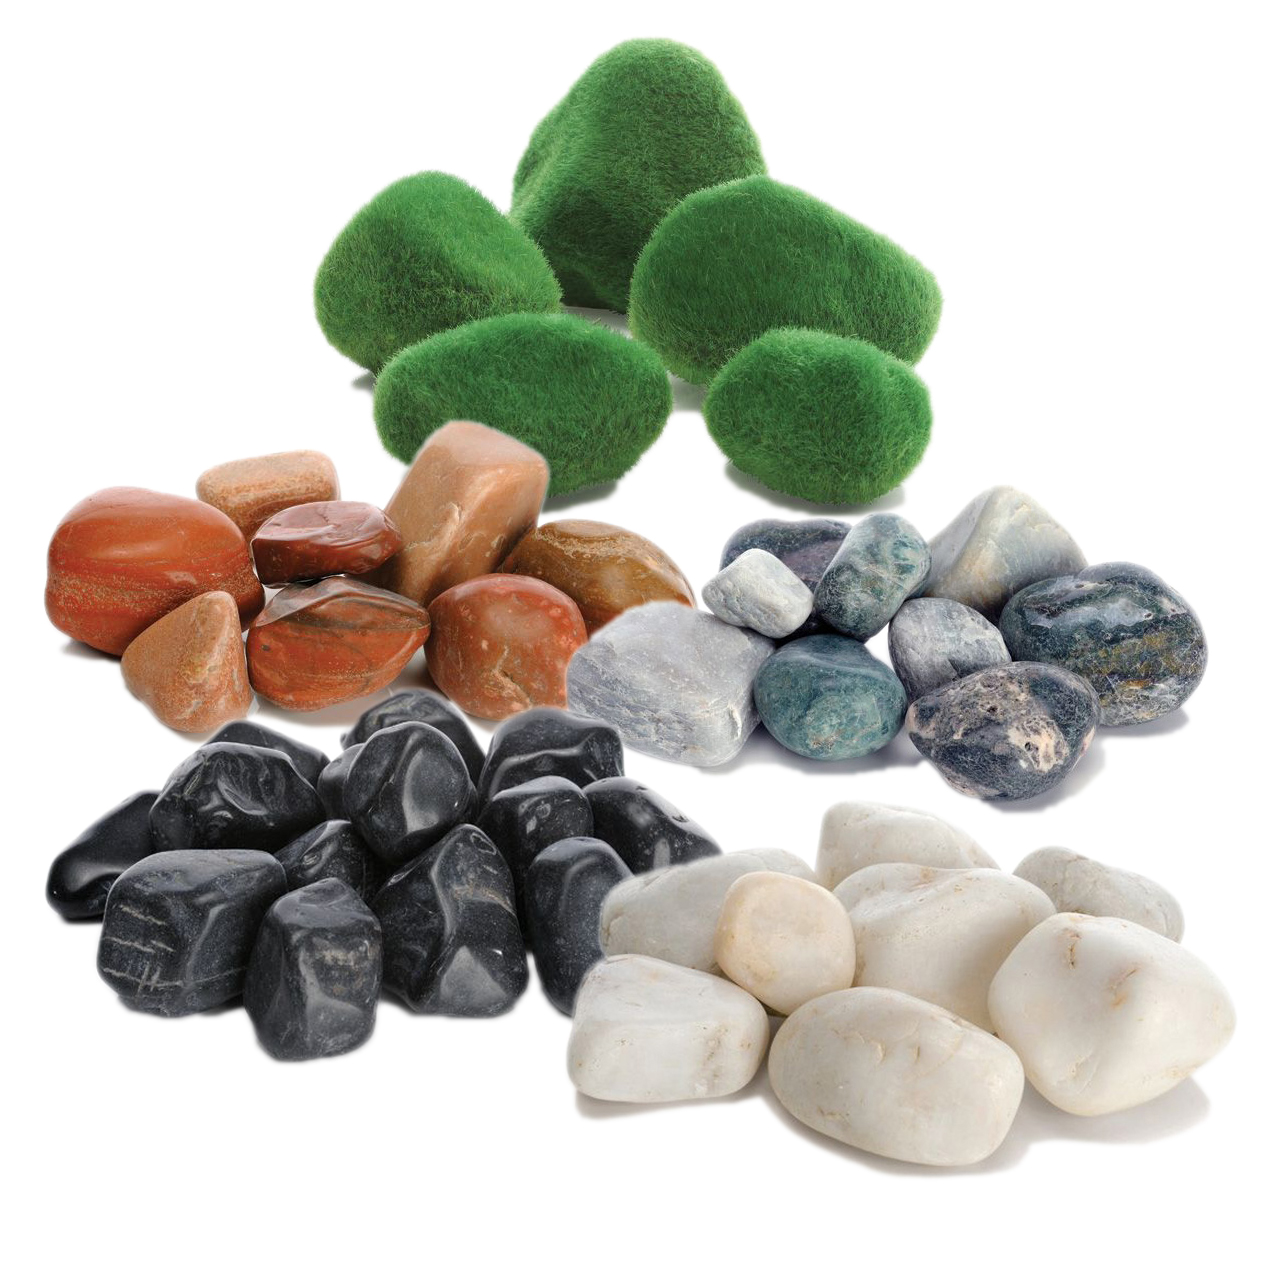 Polished White 2 Pack Feng Shui Decorative Pebbles 